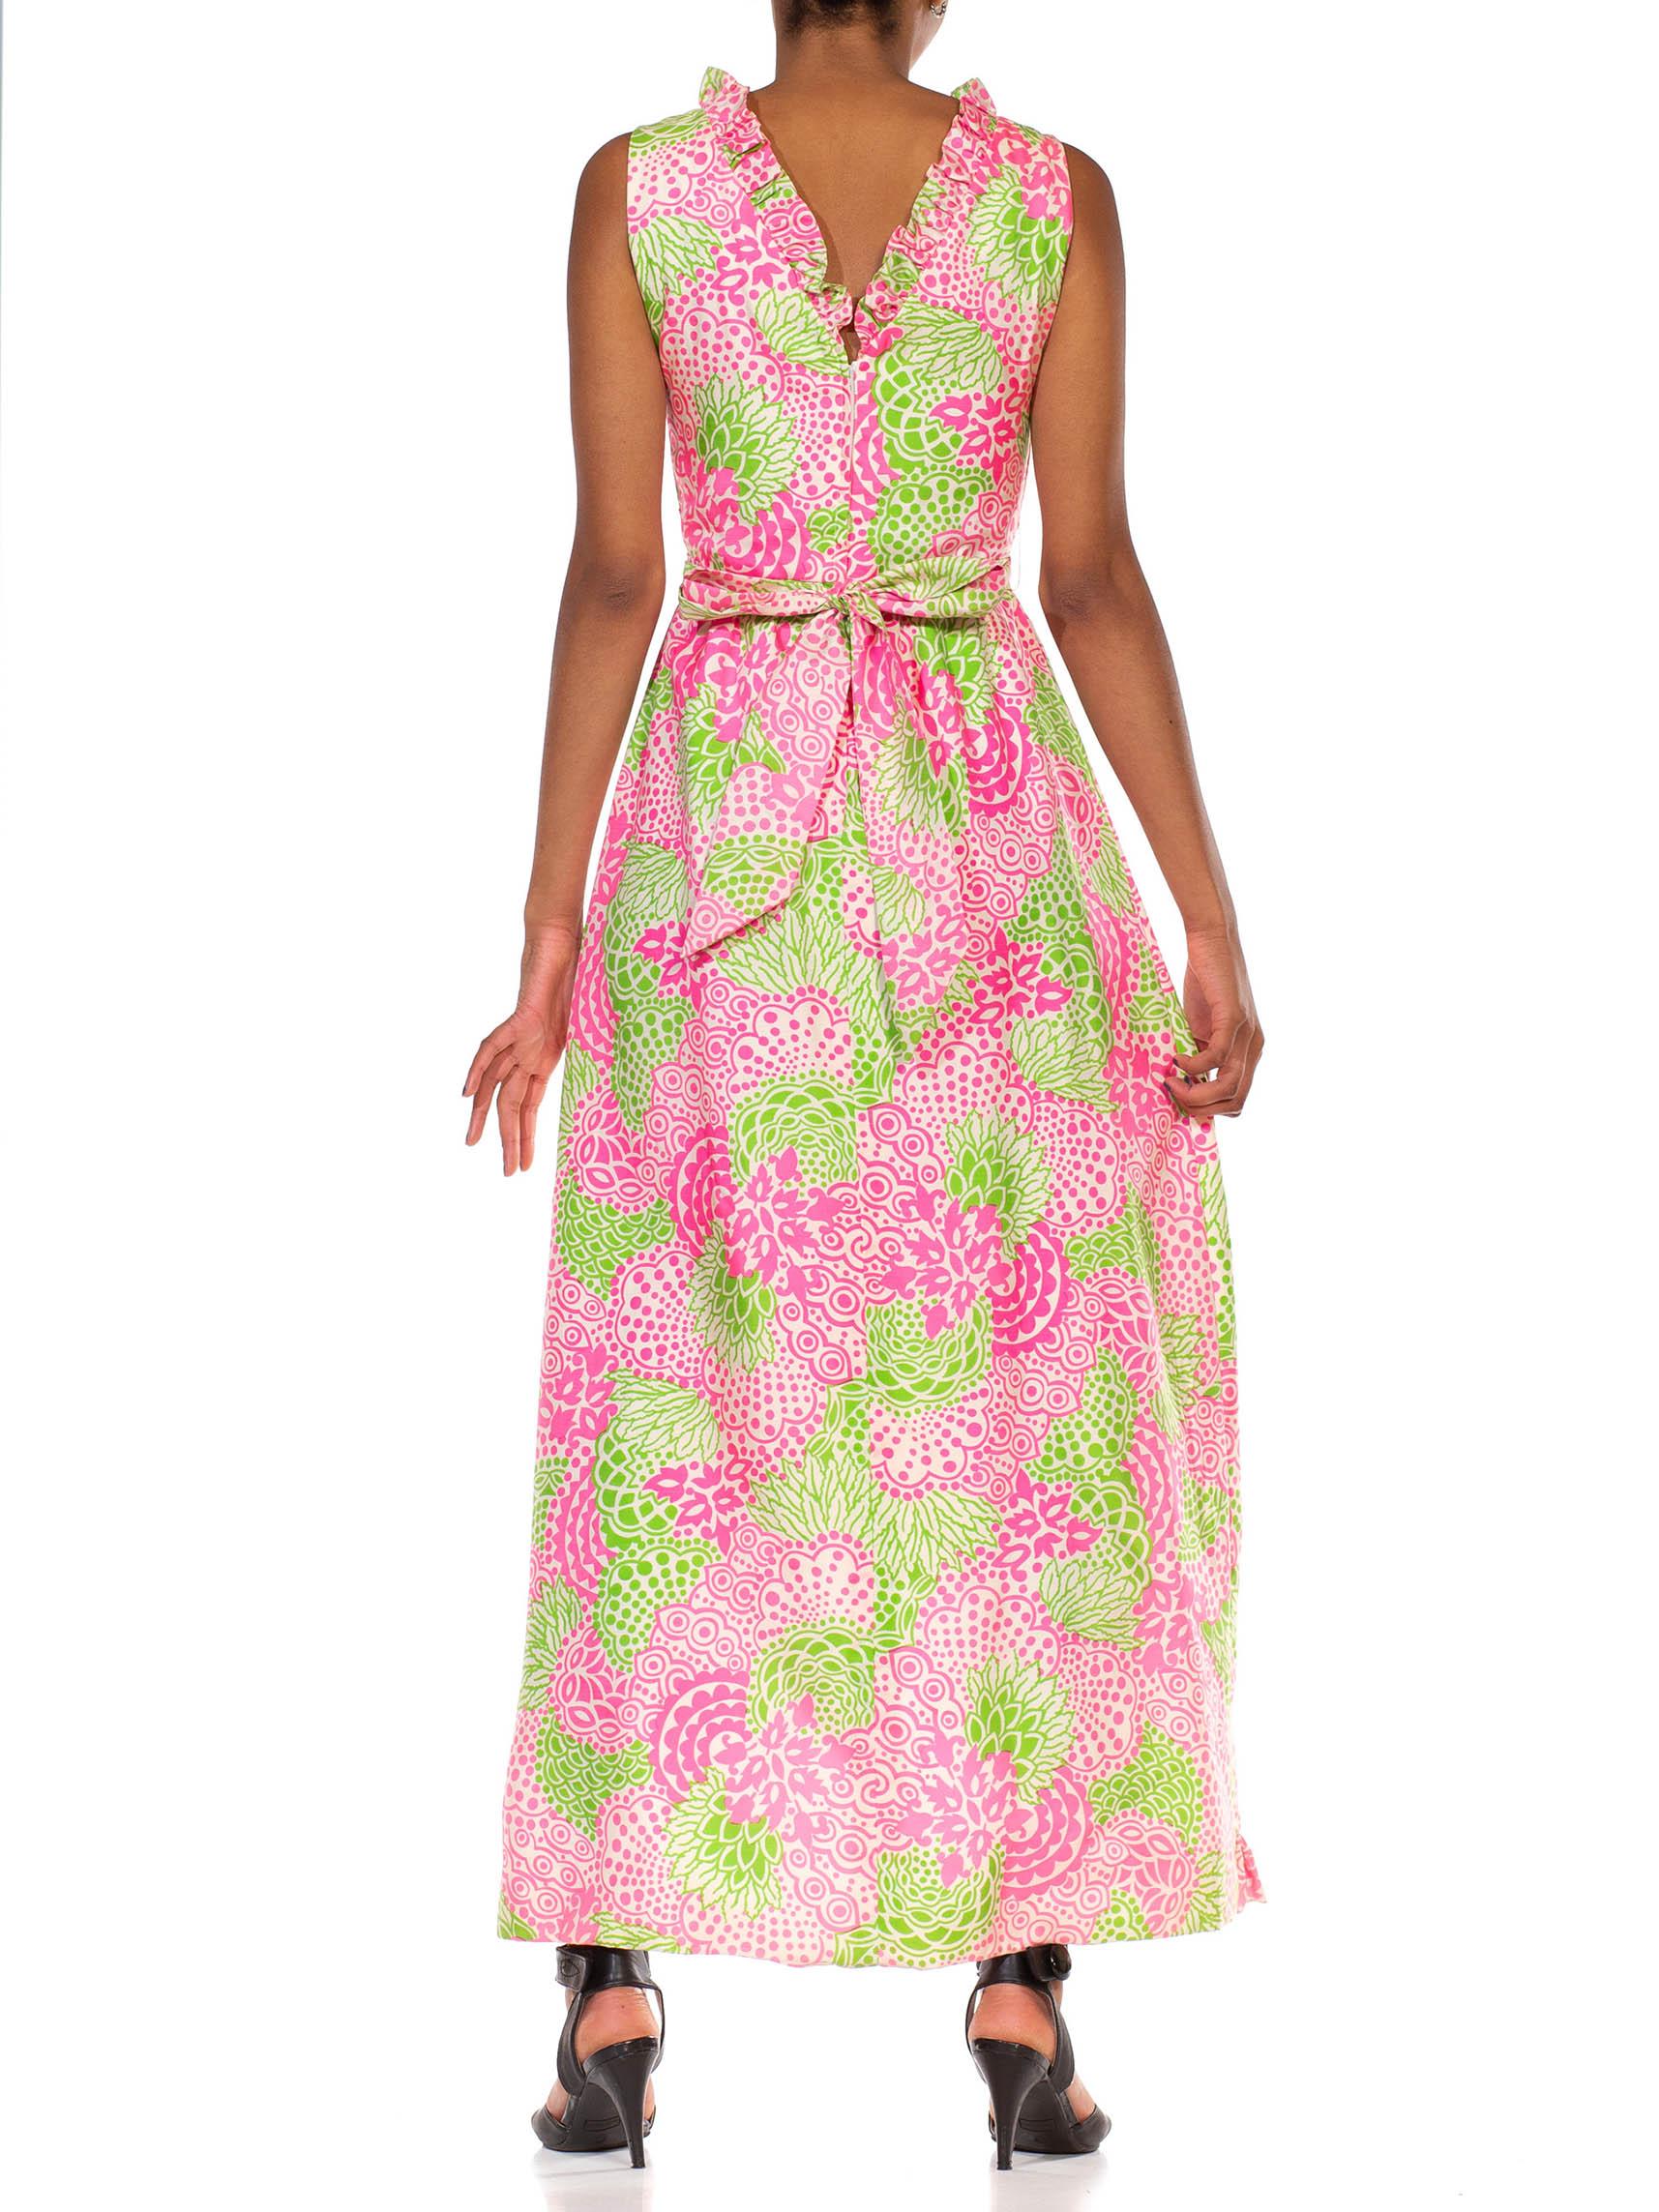 lilly pulitzer green dress